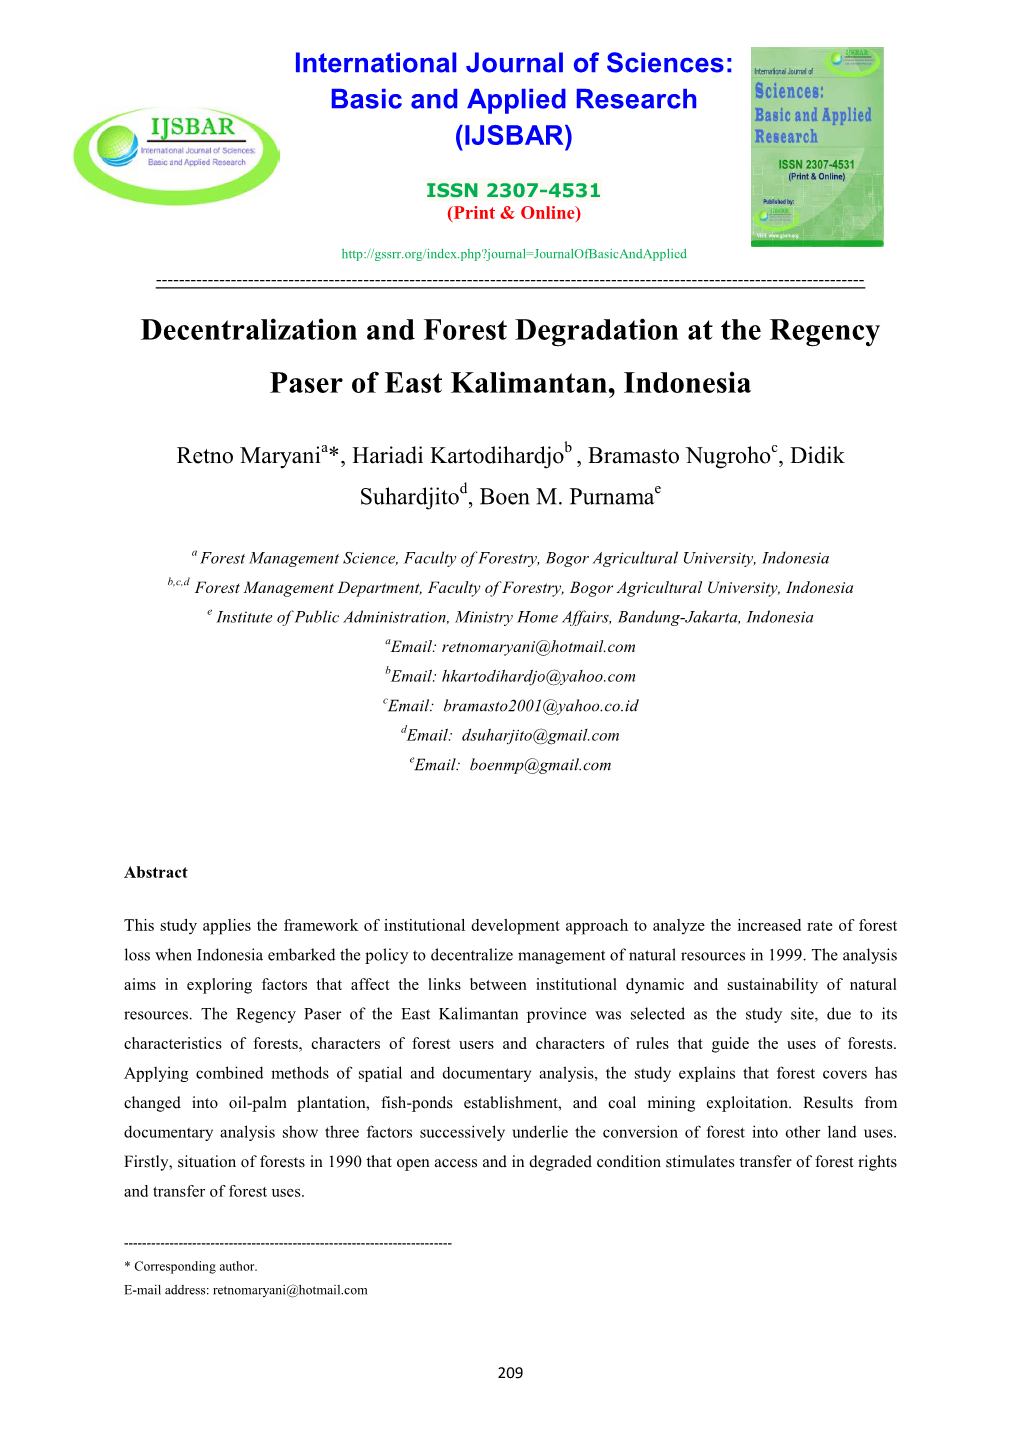 Decentralization and Forest Degradation at the Regency Paser of East Kalimantan, Indonesia